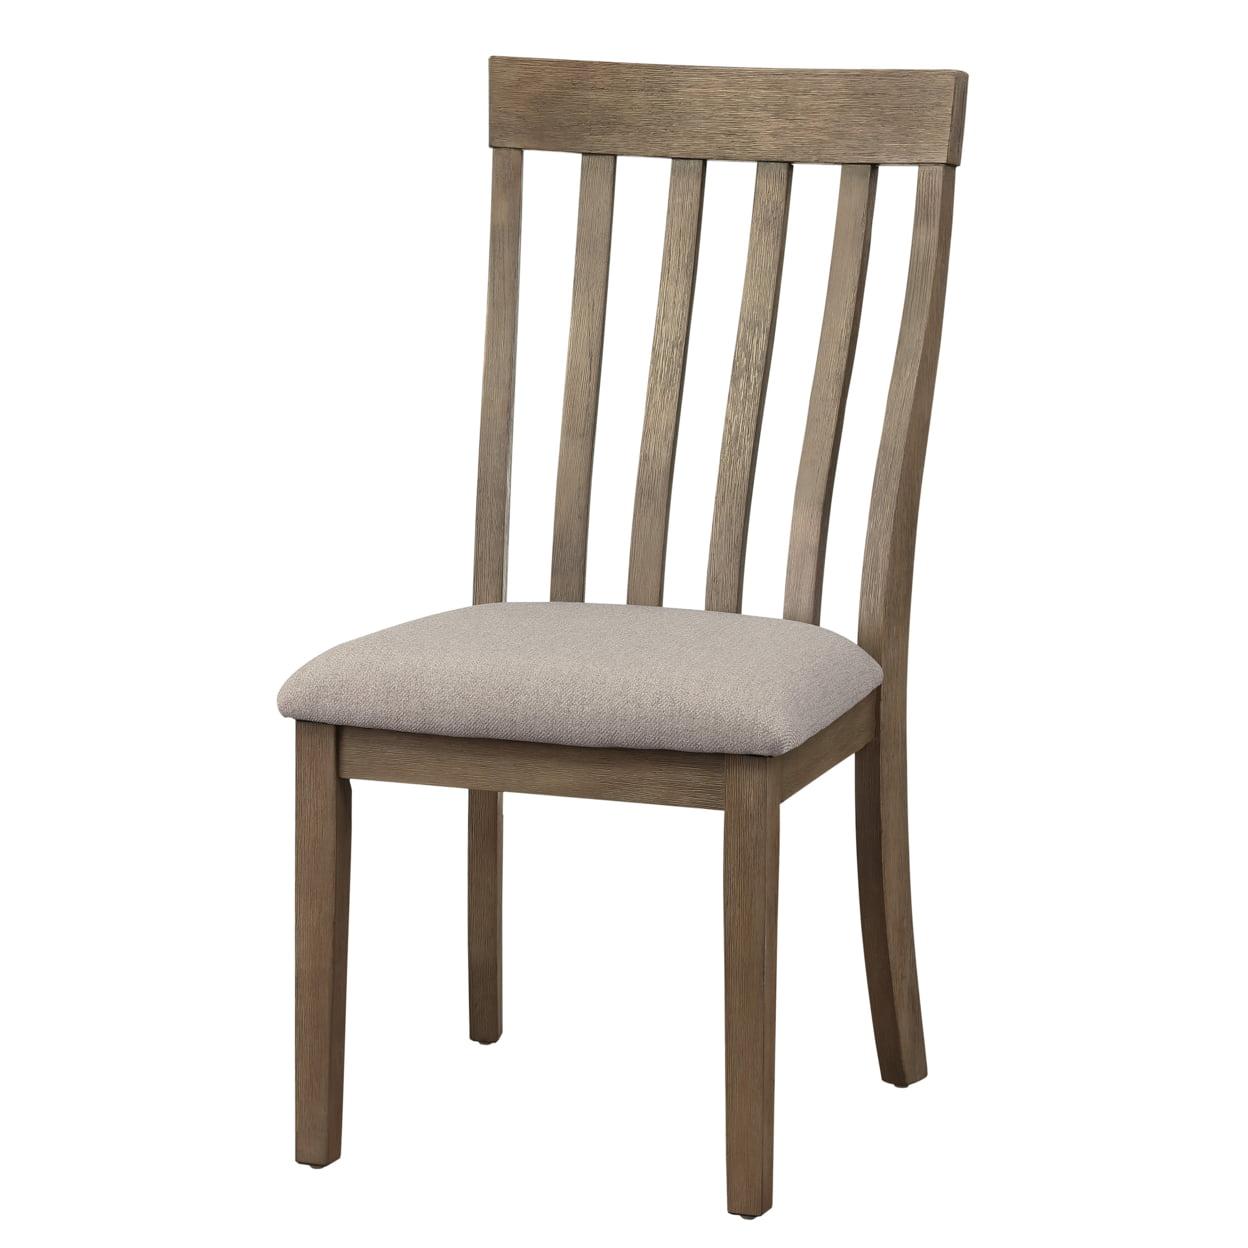 Transitional Brown Wood Side Chair with Gray Fabric Seat - Set of 2